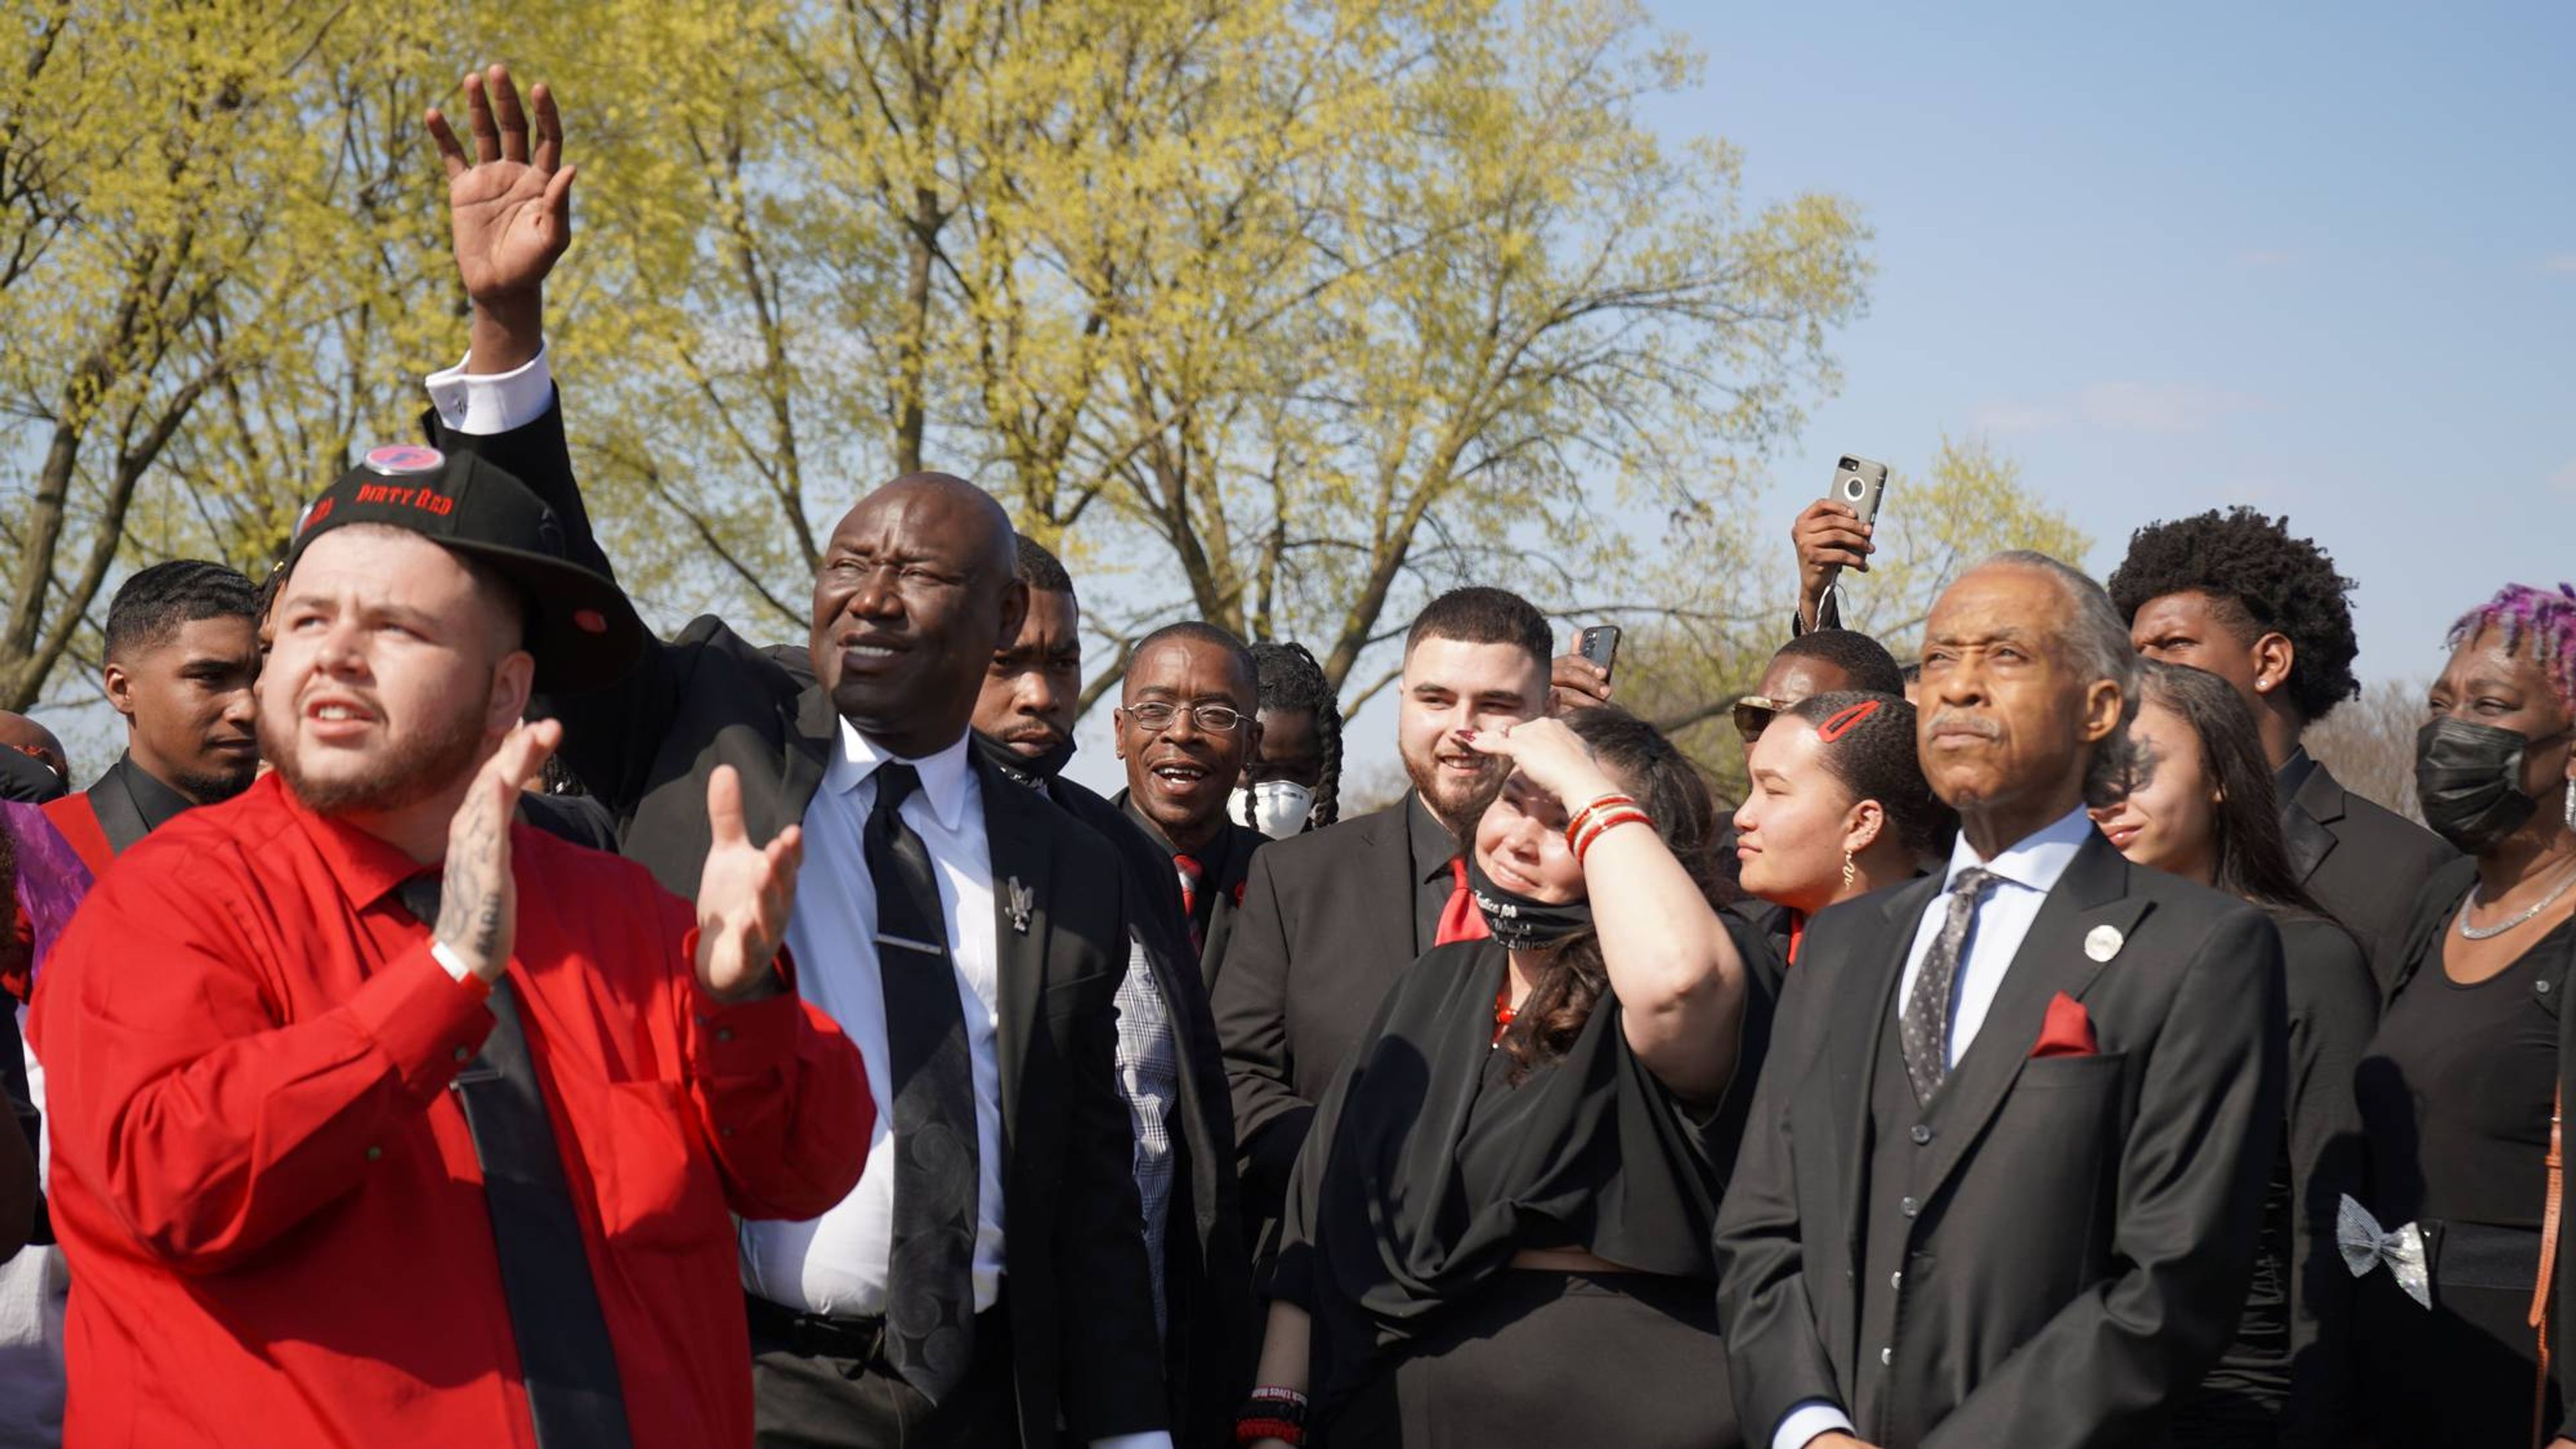 Wright, Crump, Sharpton and other mourners watch as the doves disappear, saying their final goodbyes to Daunte Wright.